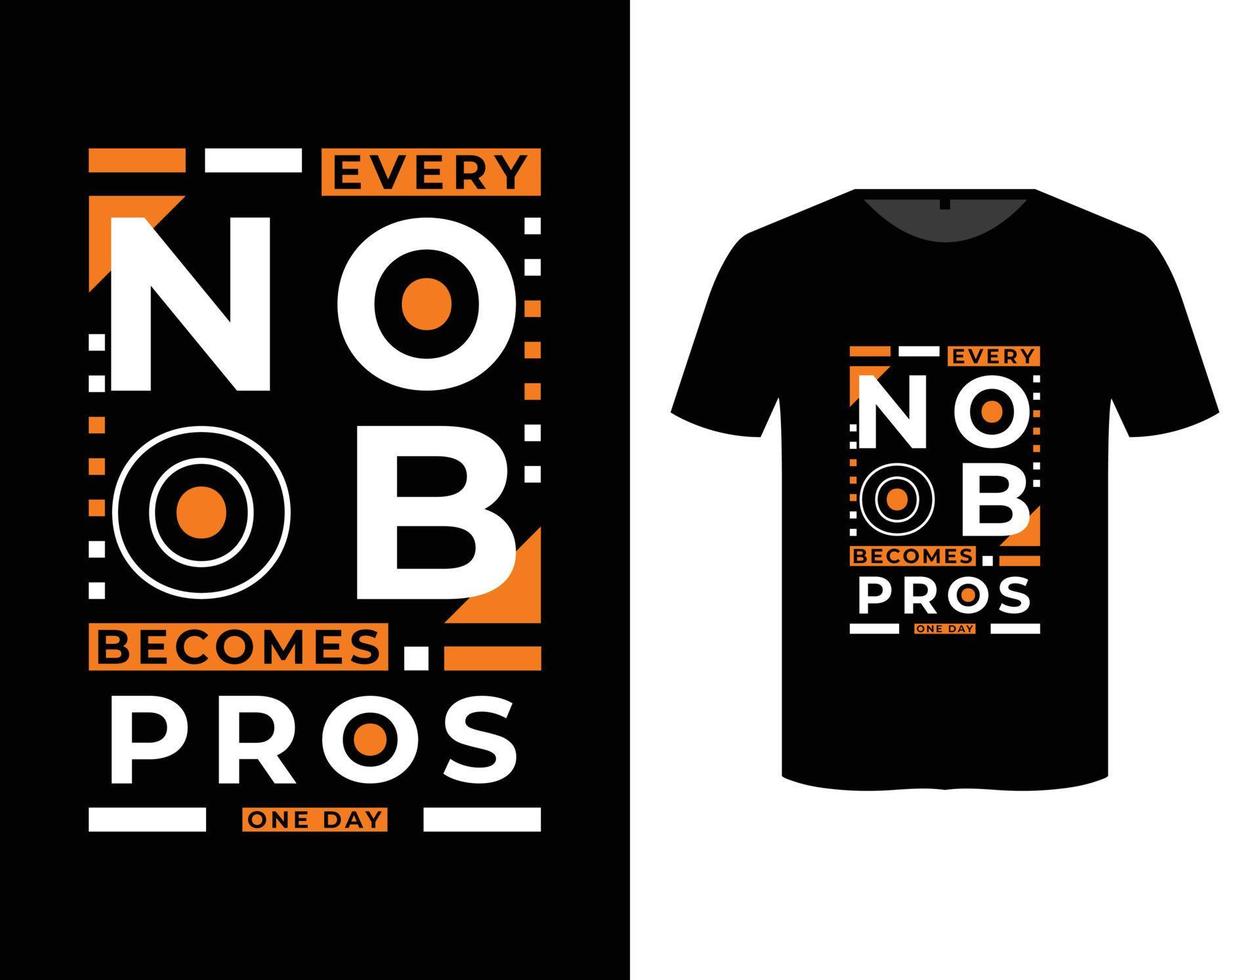 Every noob becomes pros one day motivational quote modern typography t shirt design template vector